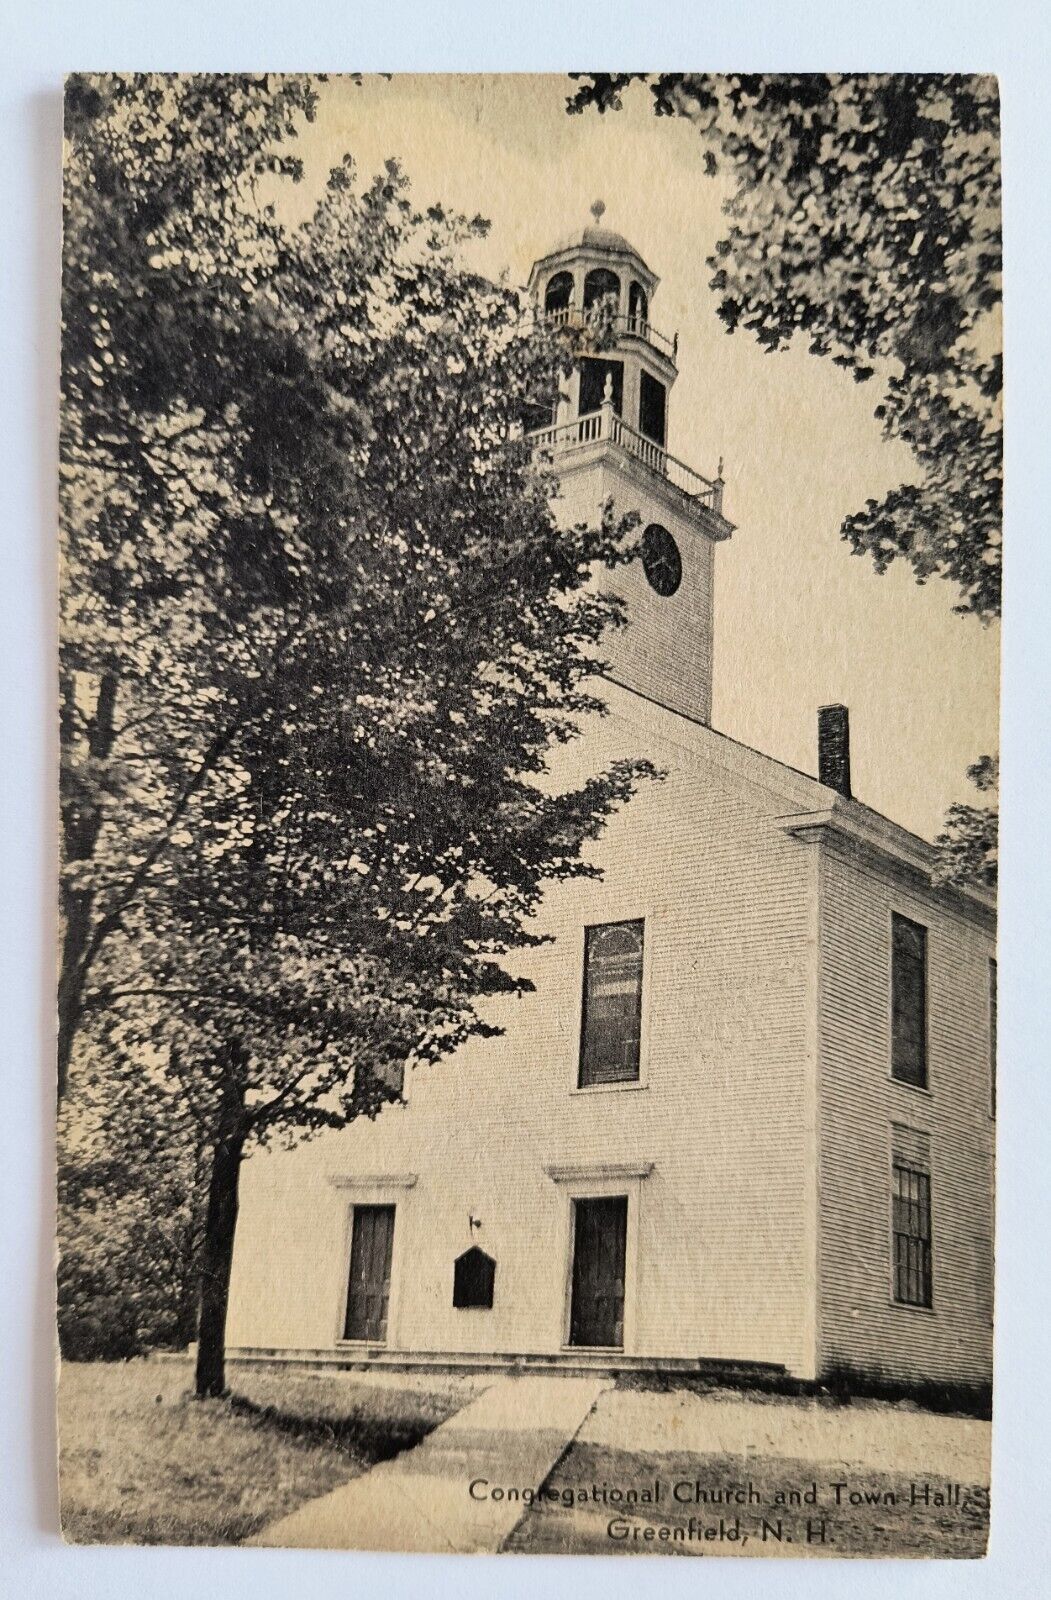 Greenfield NH New Hampshire Congregational Church & Town Hall 1950 Postcard A6